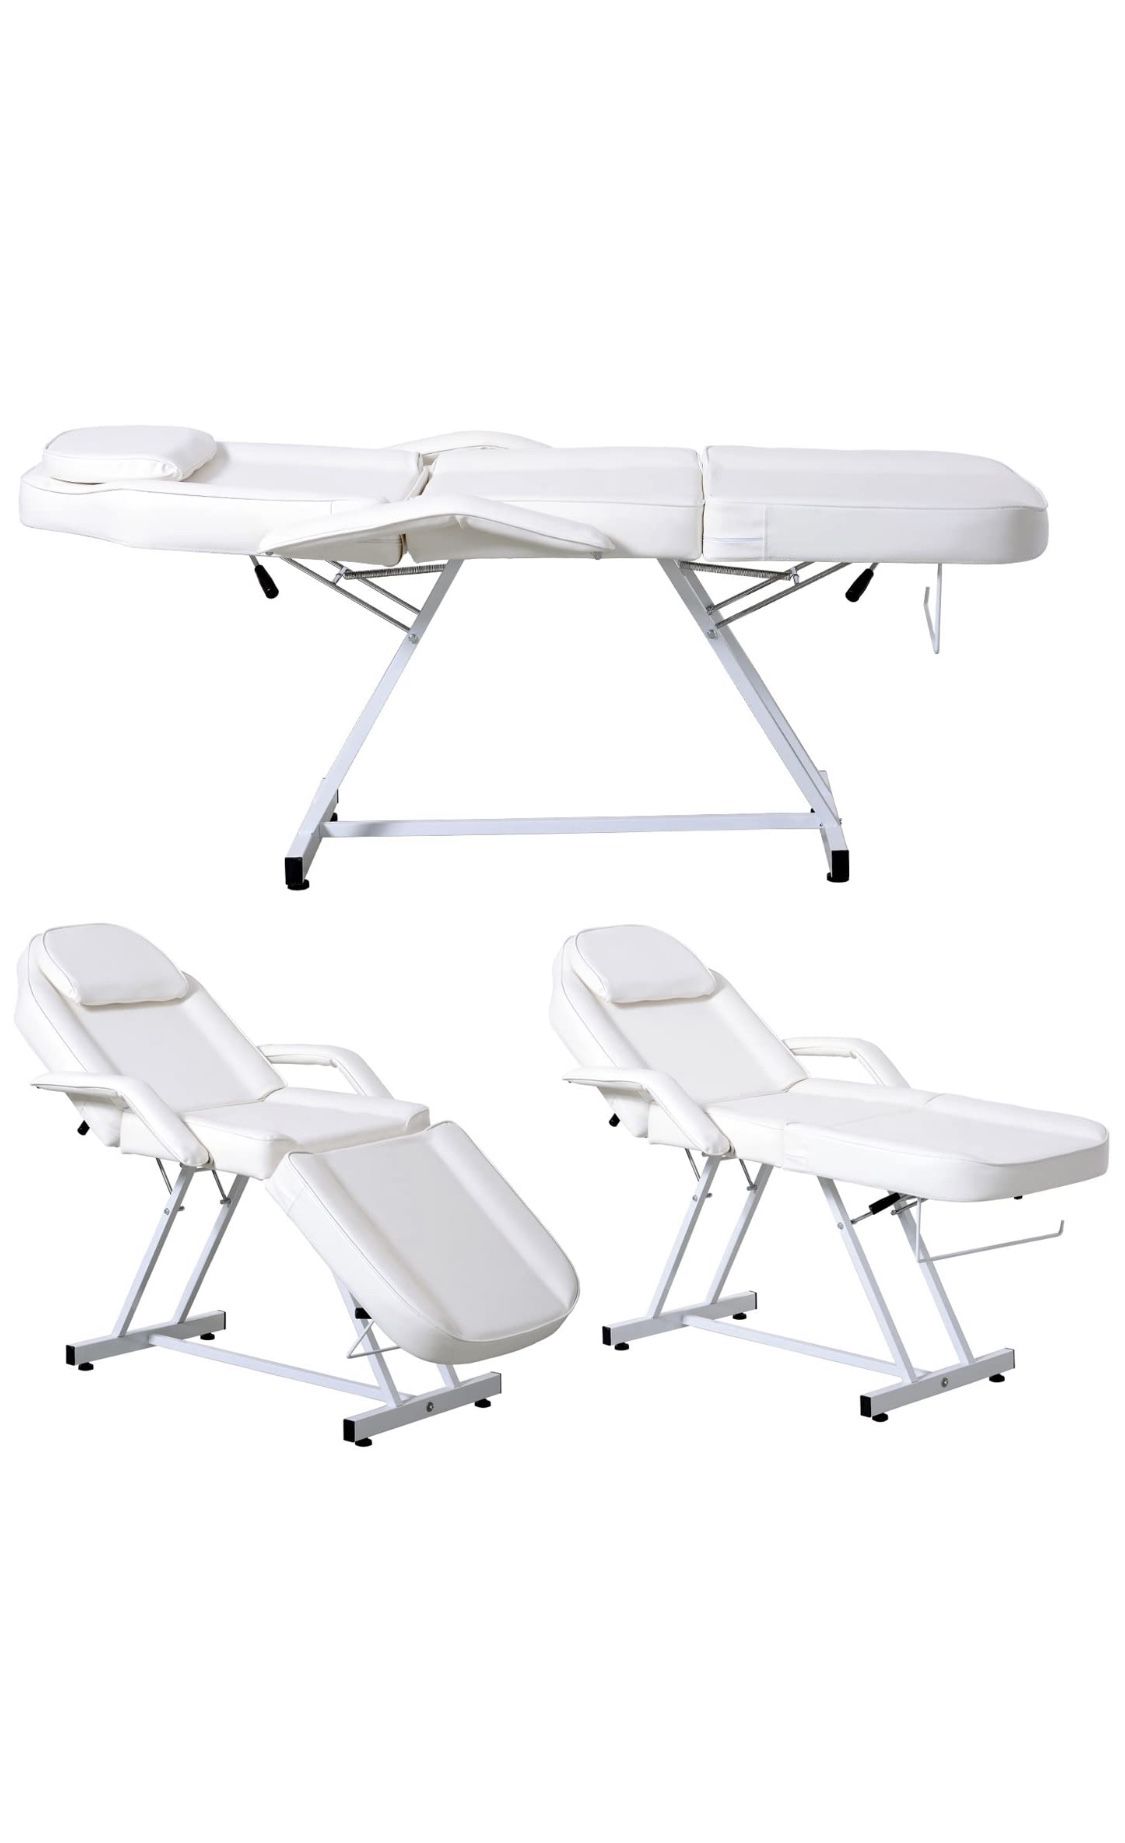 White Tattoo table- perfect for eyelash technicians